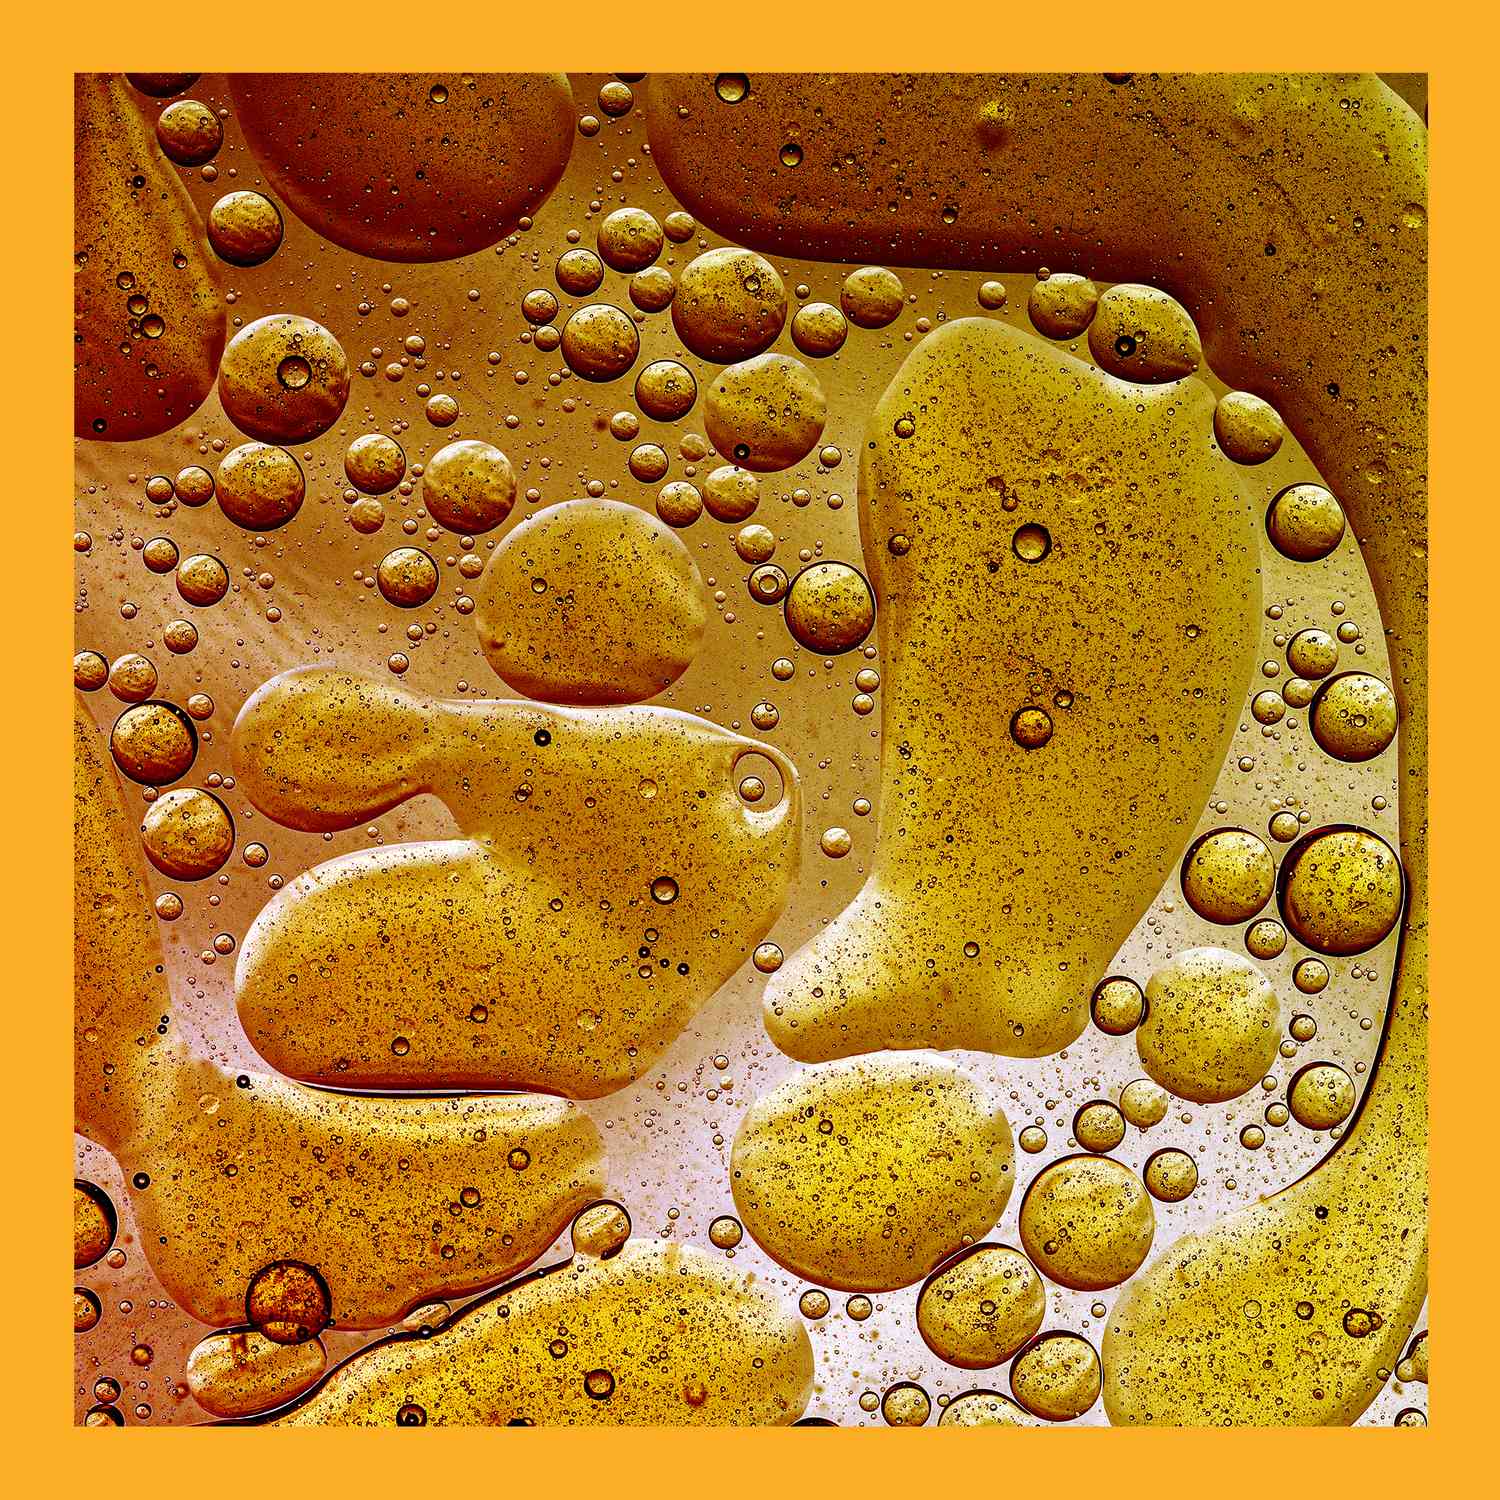 How Much Fat Should You Really Eat Every Day? , Full frame of abstract shapes and textures formed of bubbles and drops oil stains on a gold colored liquid background.